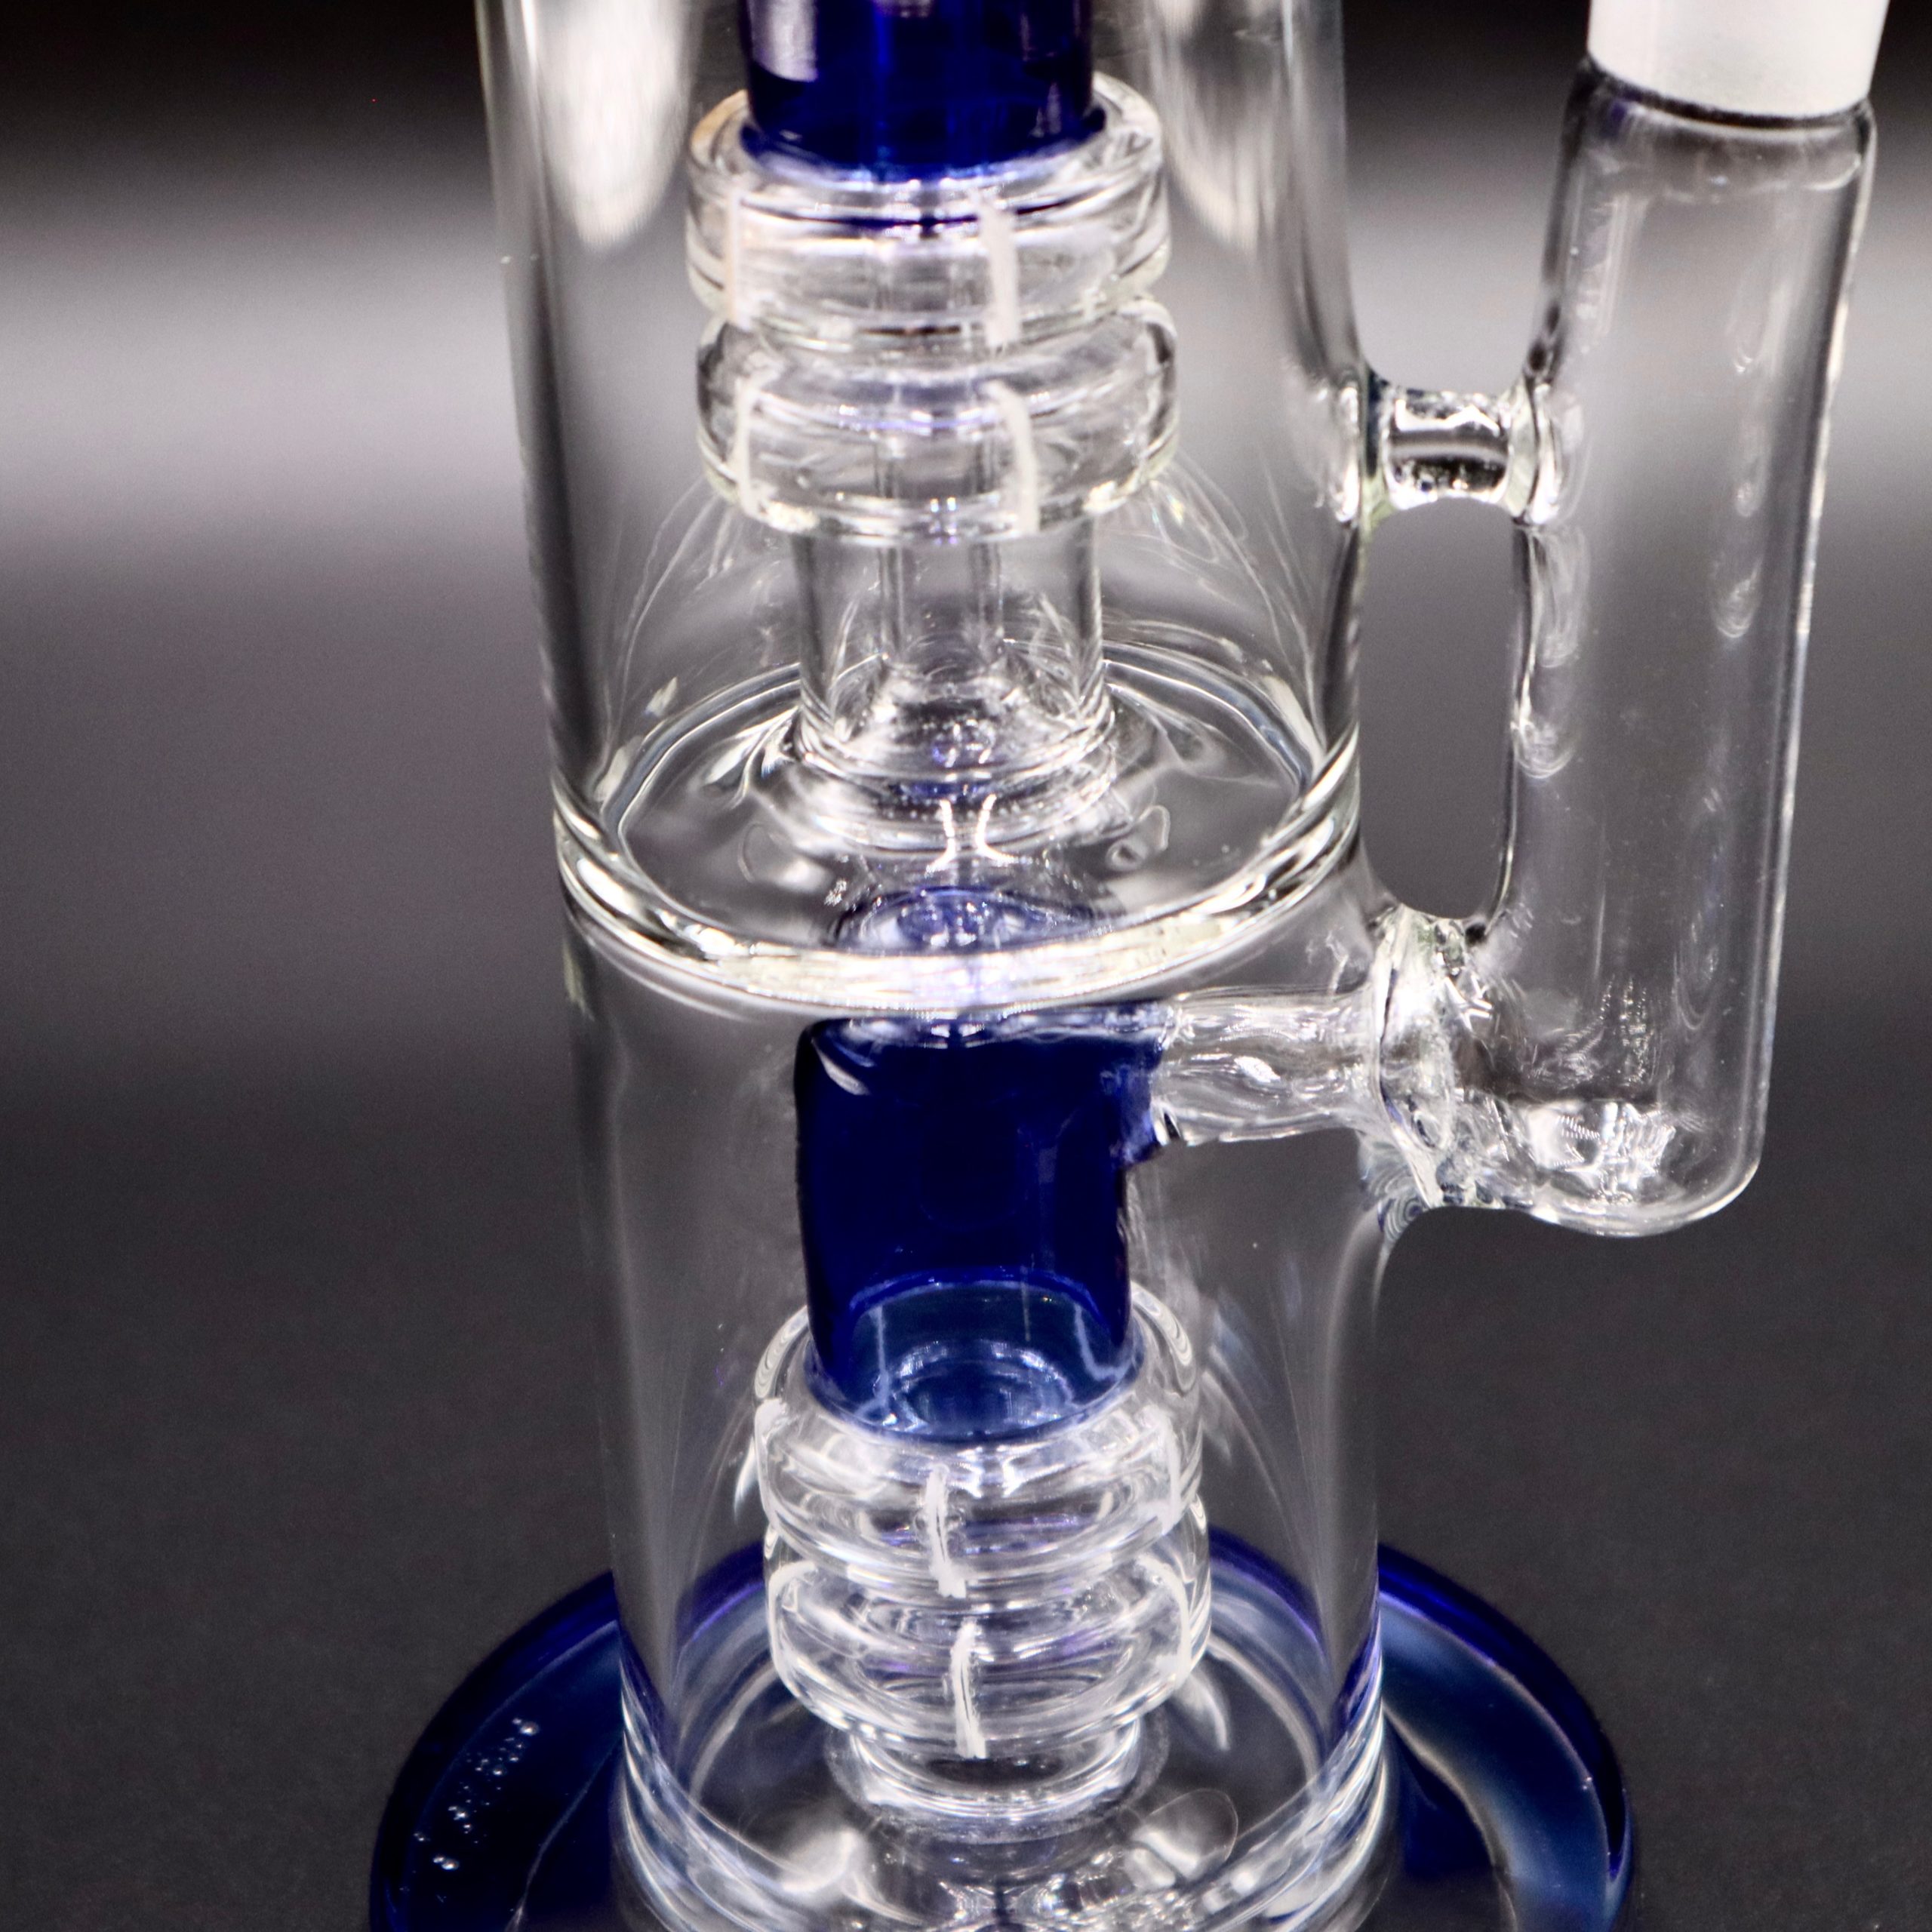 https://topfivewholesale.com/wp-content/uploads/2022/10/GL036-16%E2%80%B3-Water-Pipe-Double-Chamber-Spiral-Percolator-Blue-up-close.jpg